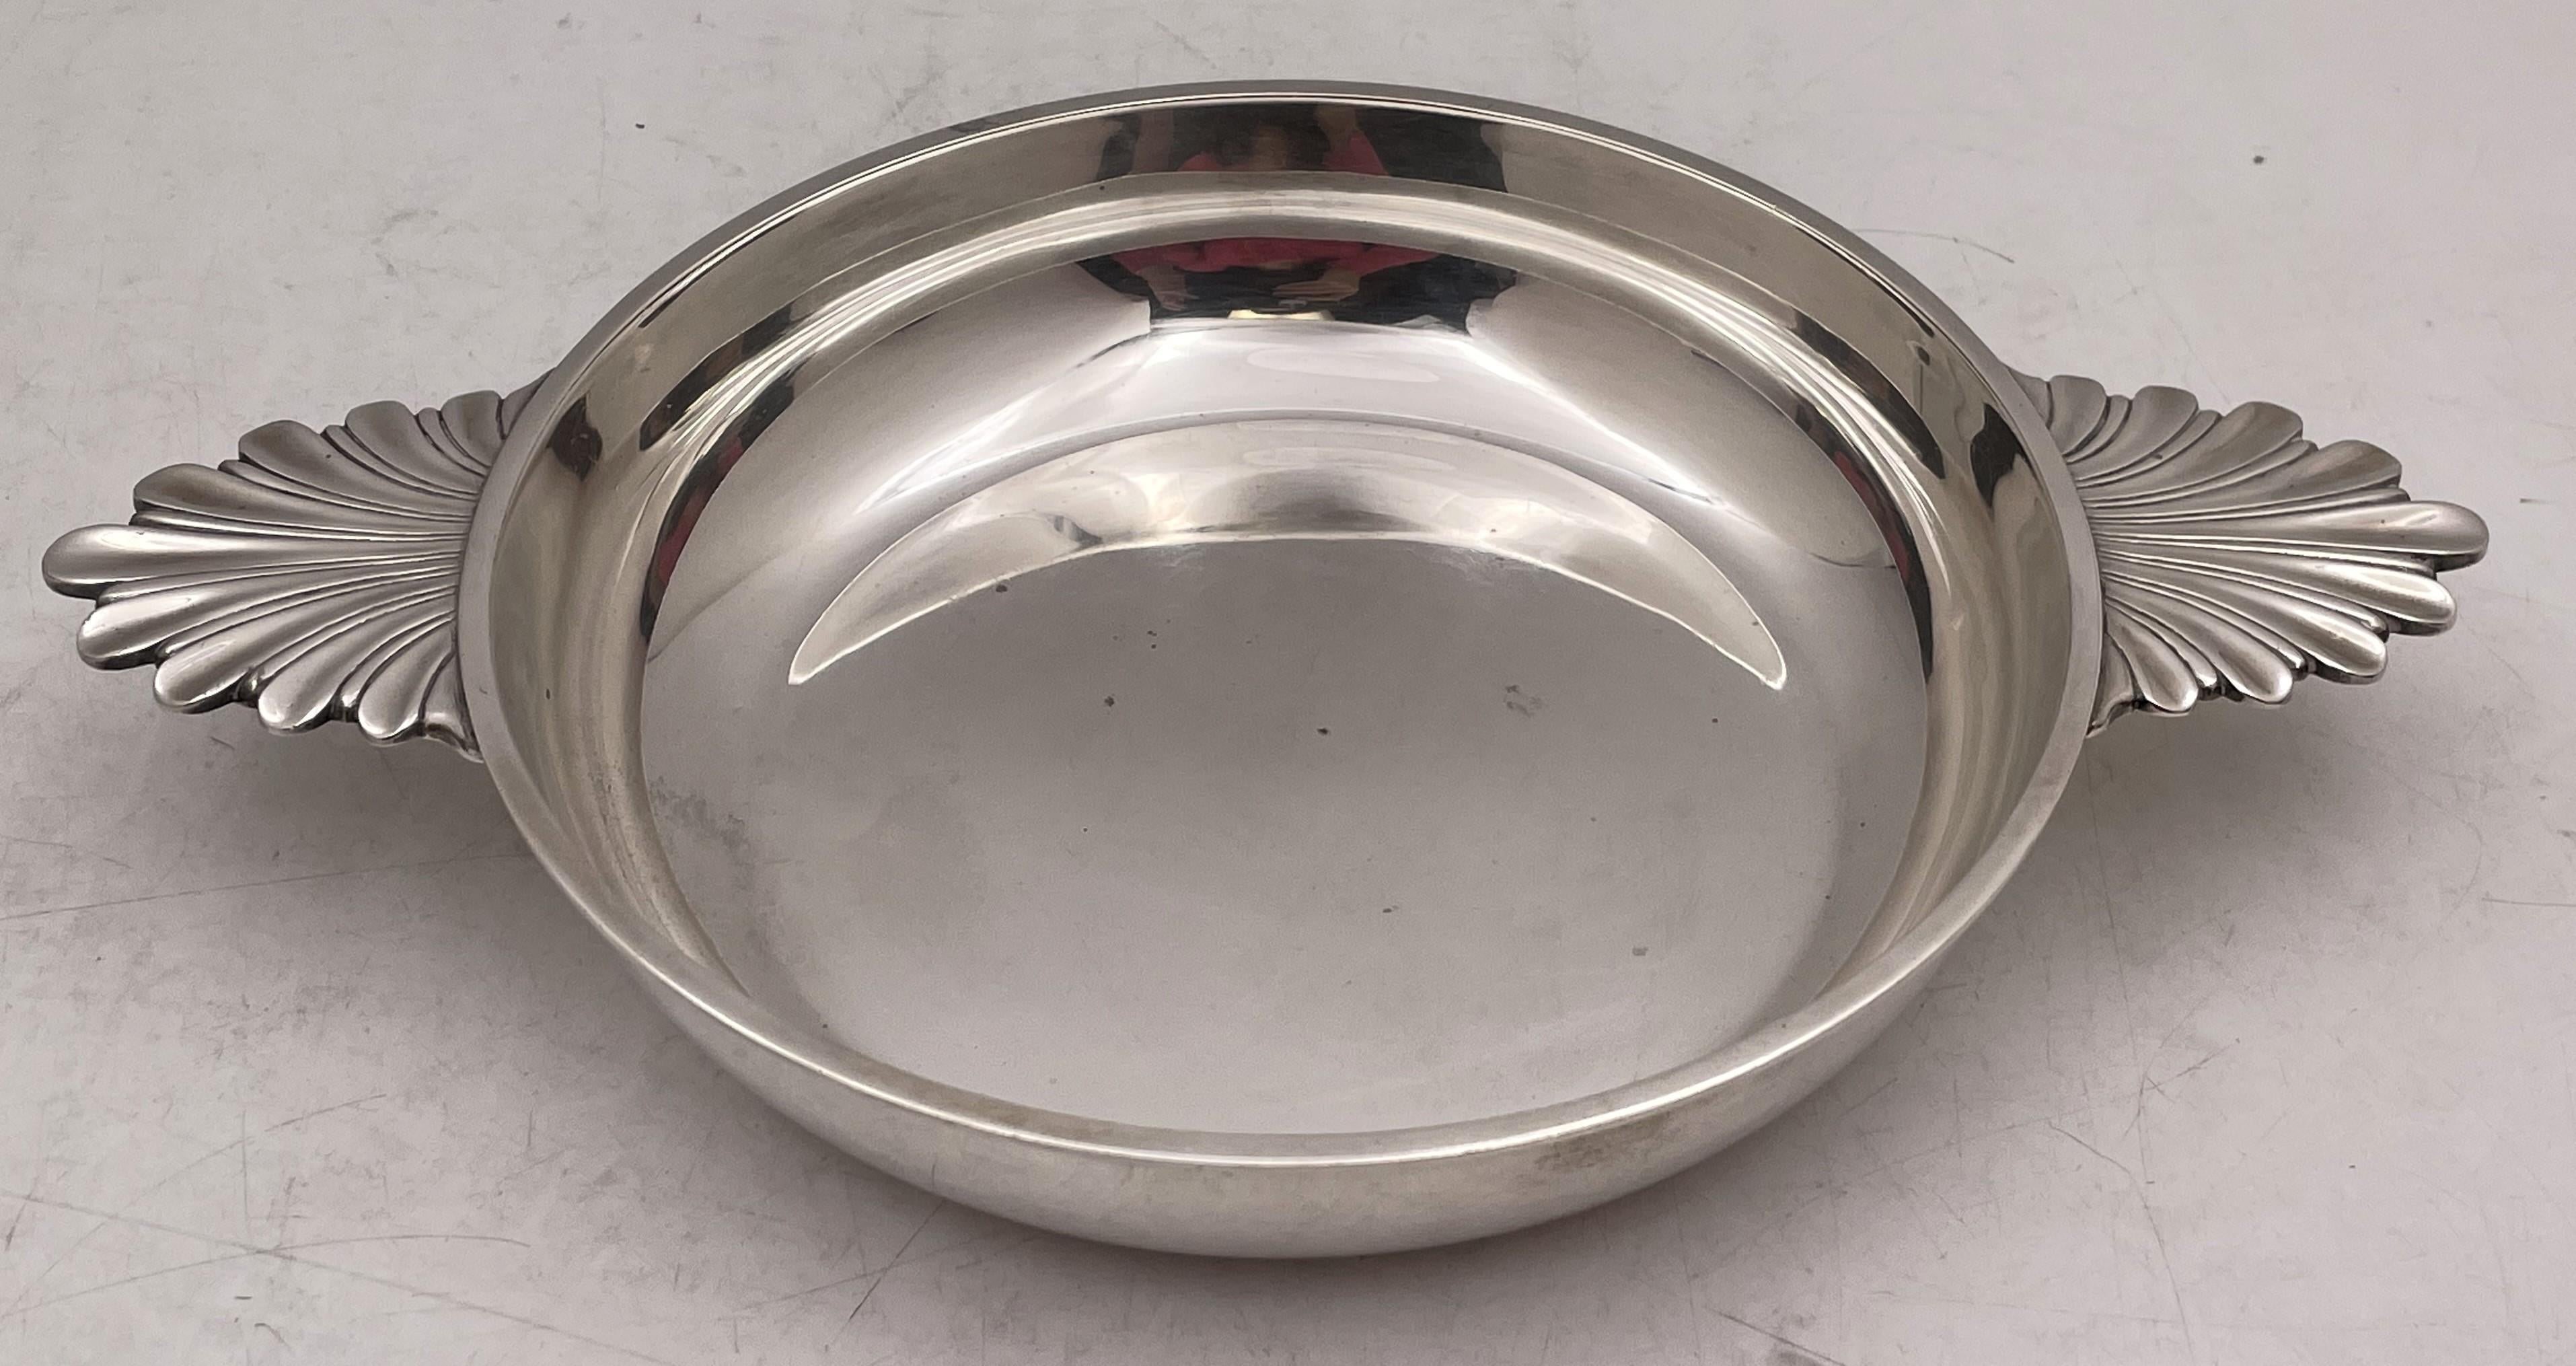 Puiforcat, French 0.950 (higher purity than sterling) silver serving bowl in Art Deco style, with handles adorned with acanthus leaves. It measures 12 1/8'' from handle to handle (bowl diameter is 7 3/4'') by 1 3/4'' in height, weighs 17.1 troy